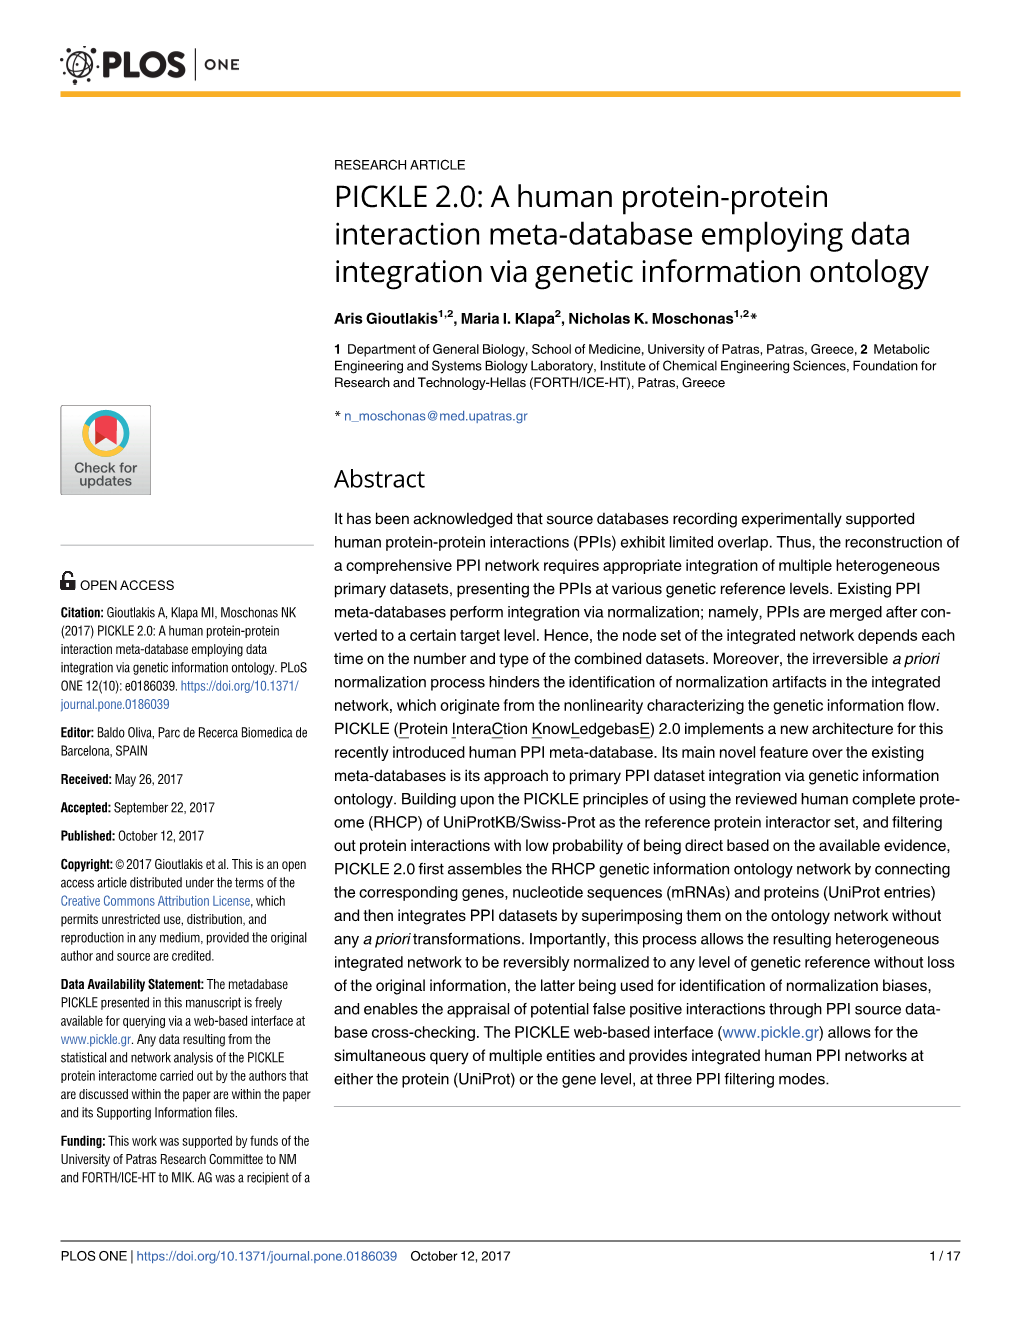 PICKLE 2.0: a Human Protein-Protein Interaction Meta-Database Employing Data Integration Via Genetic Information Ontology